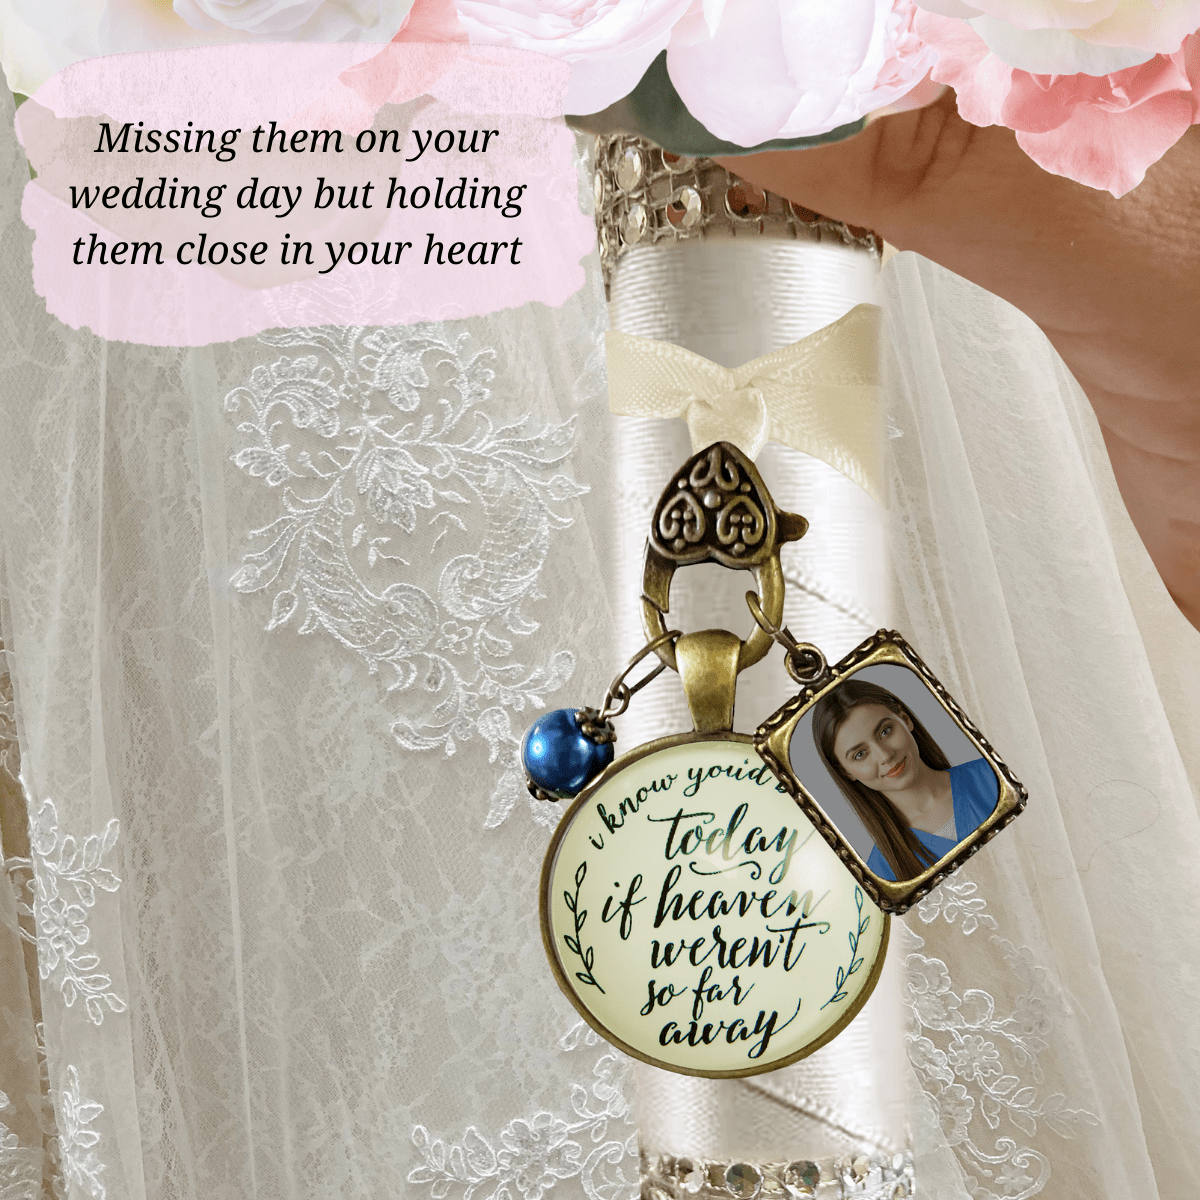 Wedding Bouquet Memorial Charm I Know You'd Be Here Heaven Rustic Memory Photo - Gutsy Goodness Handmade Jewelry Gifts